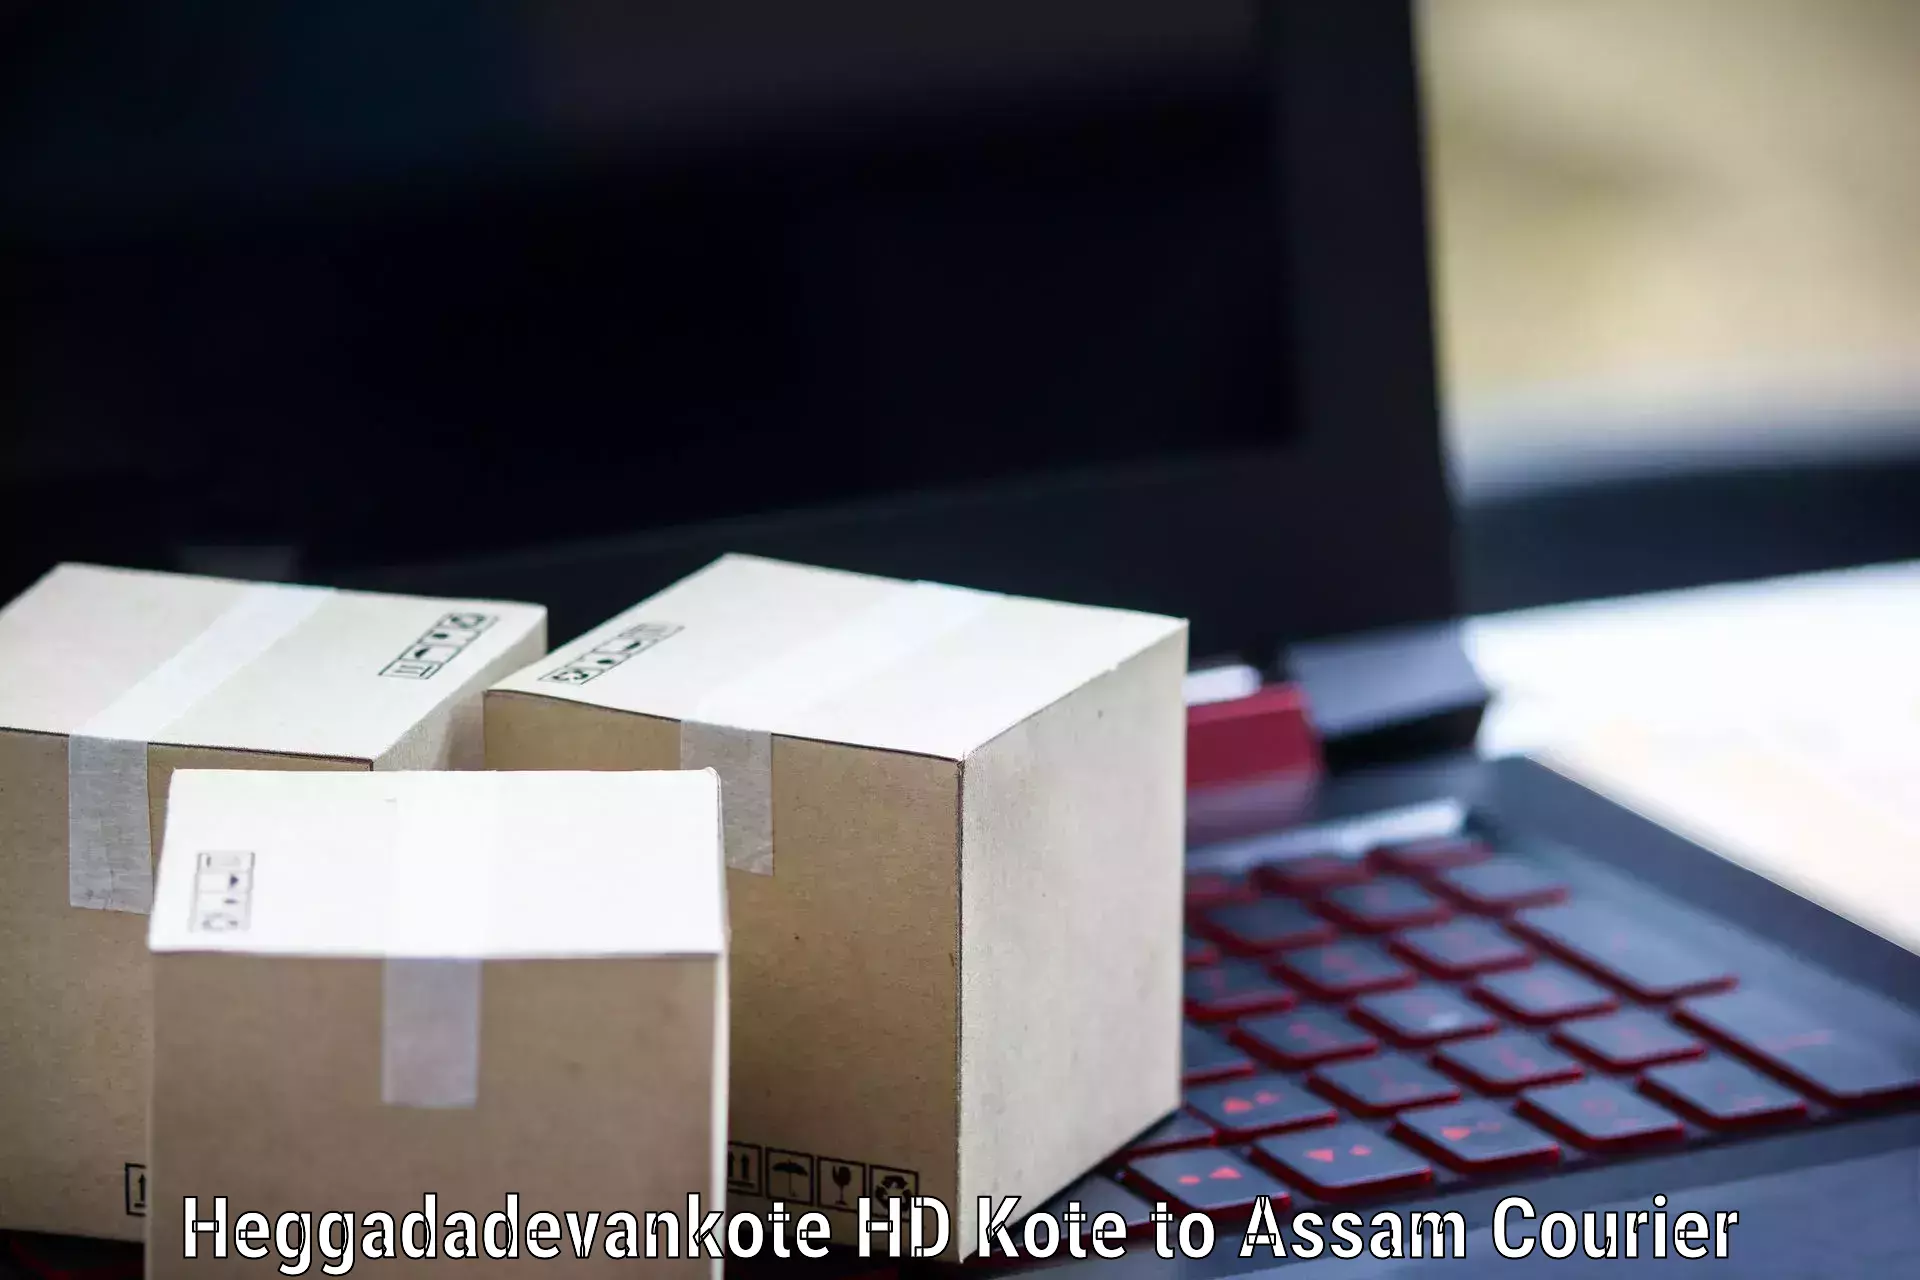 Corporate courier solutions Heggadadevankote HD Kote to Mariani